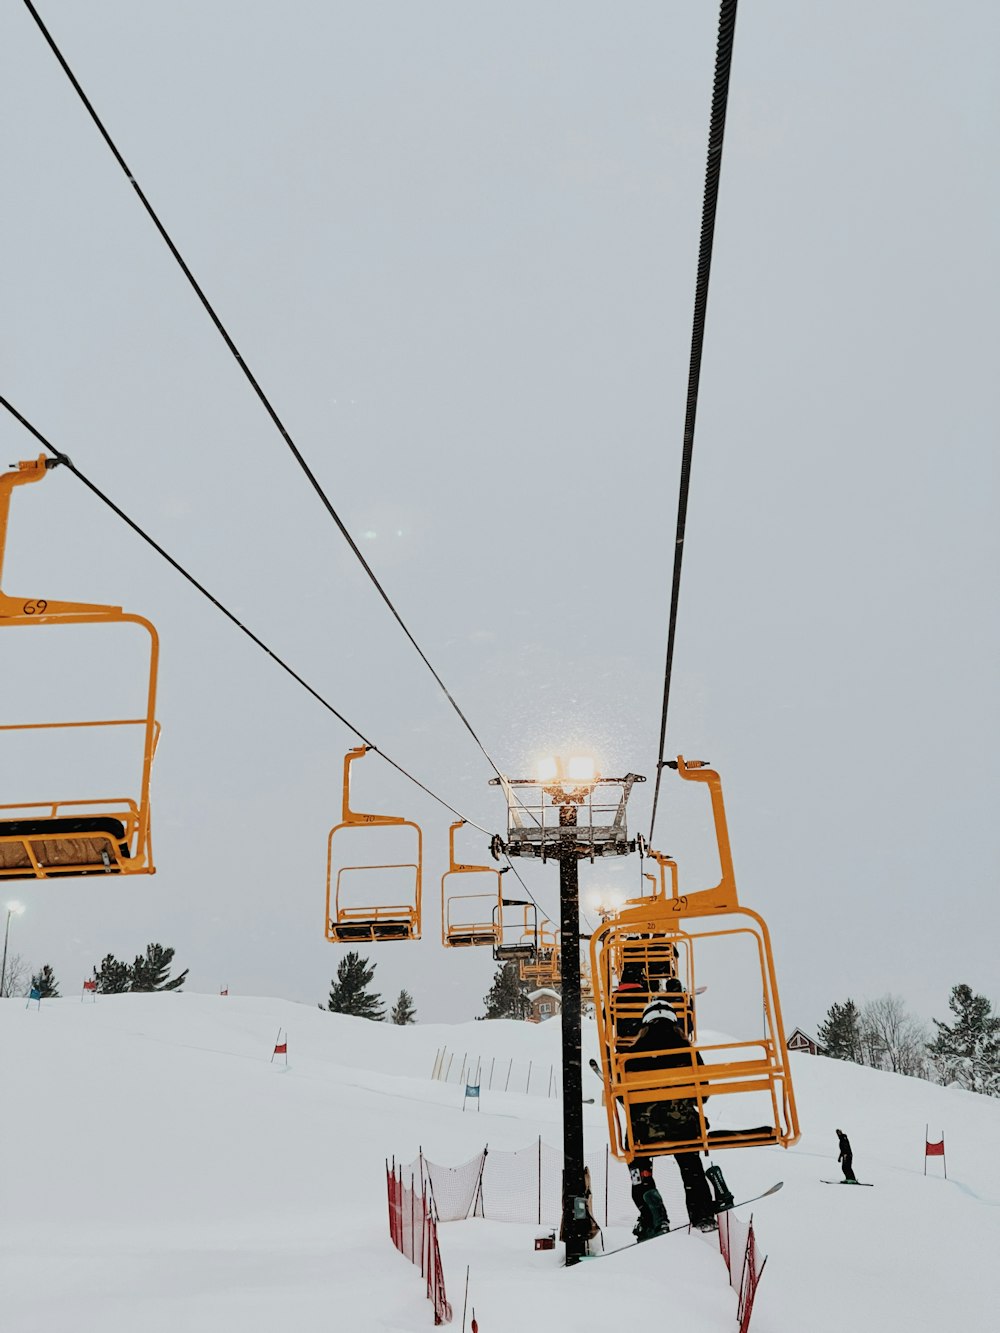 a ski lift with two people on it in the snow